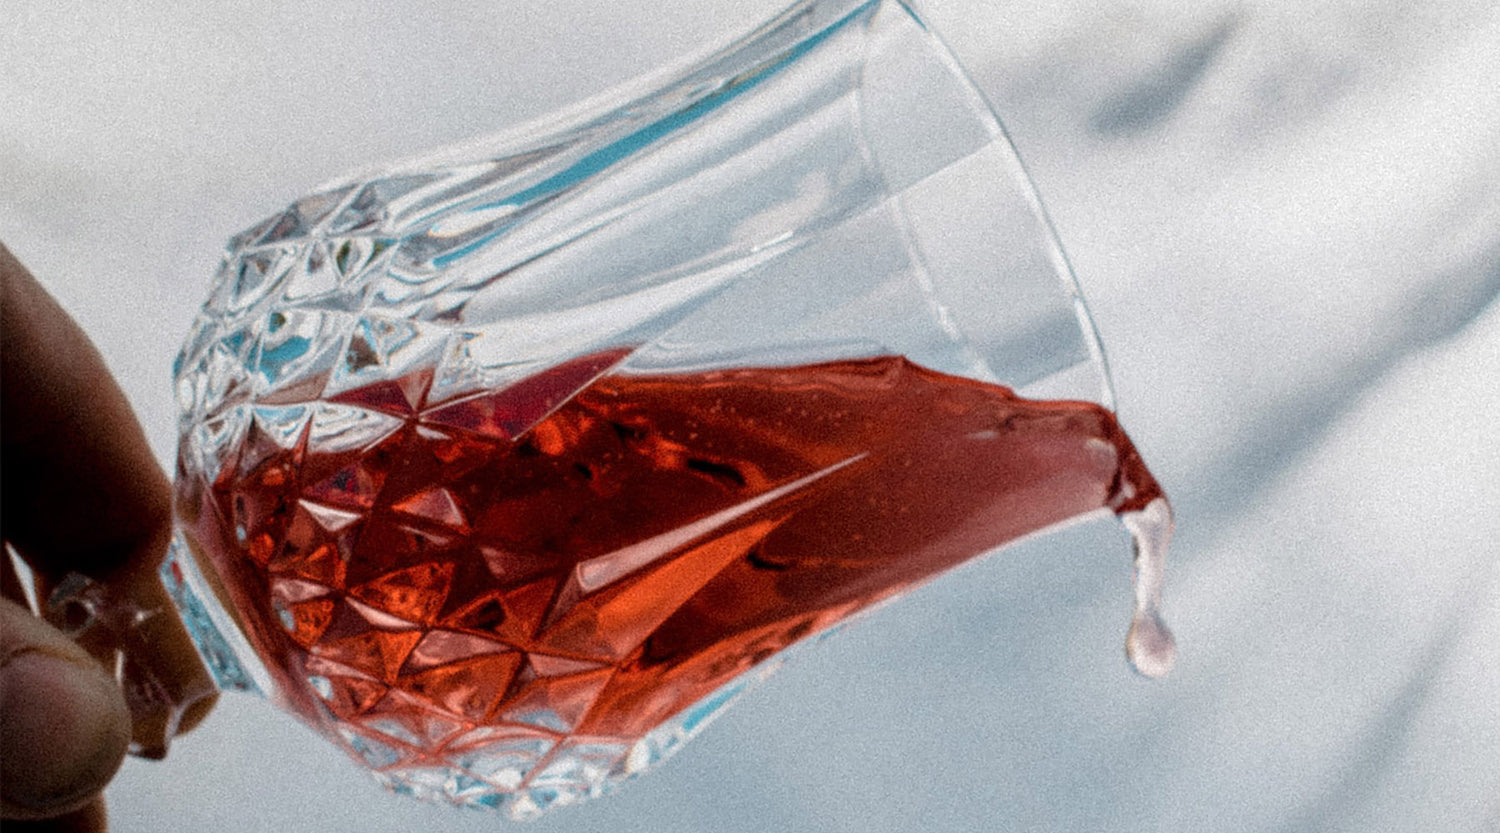 What is Natural Wine?